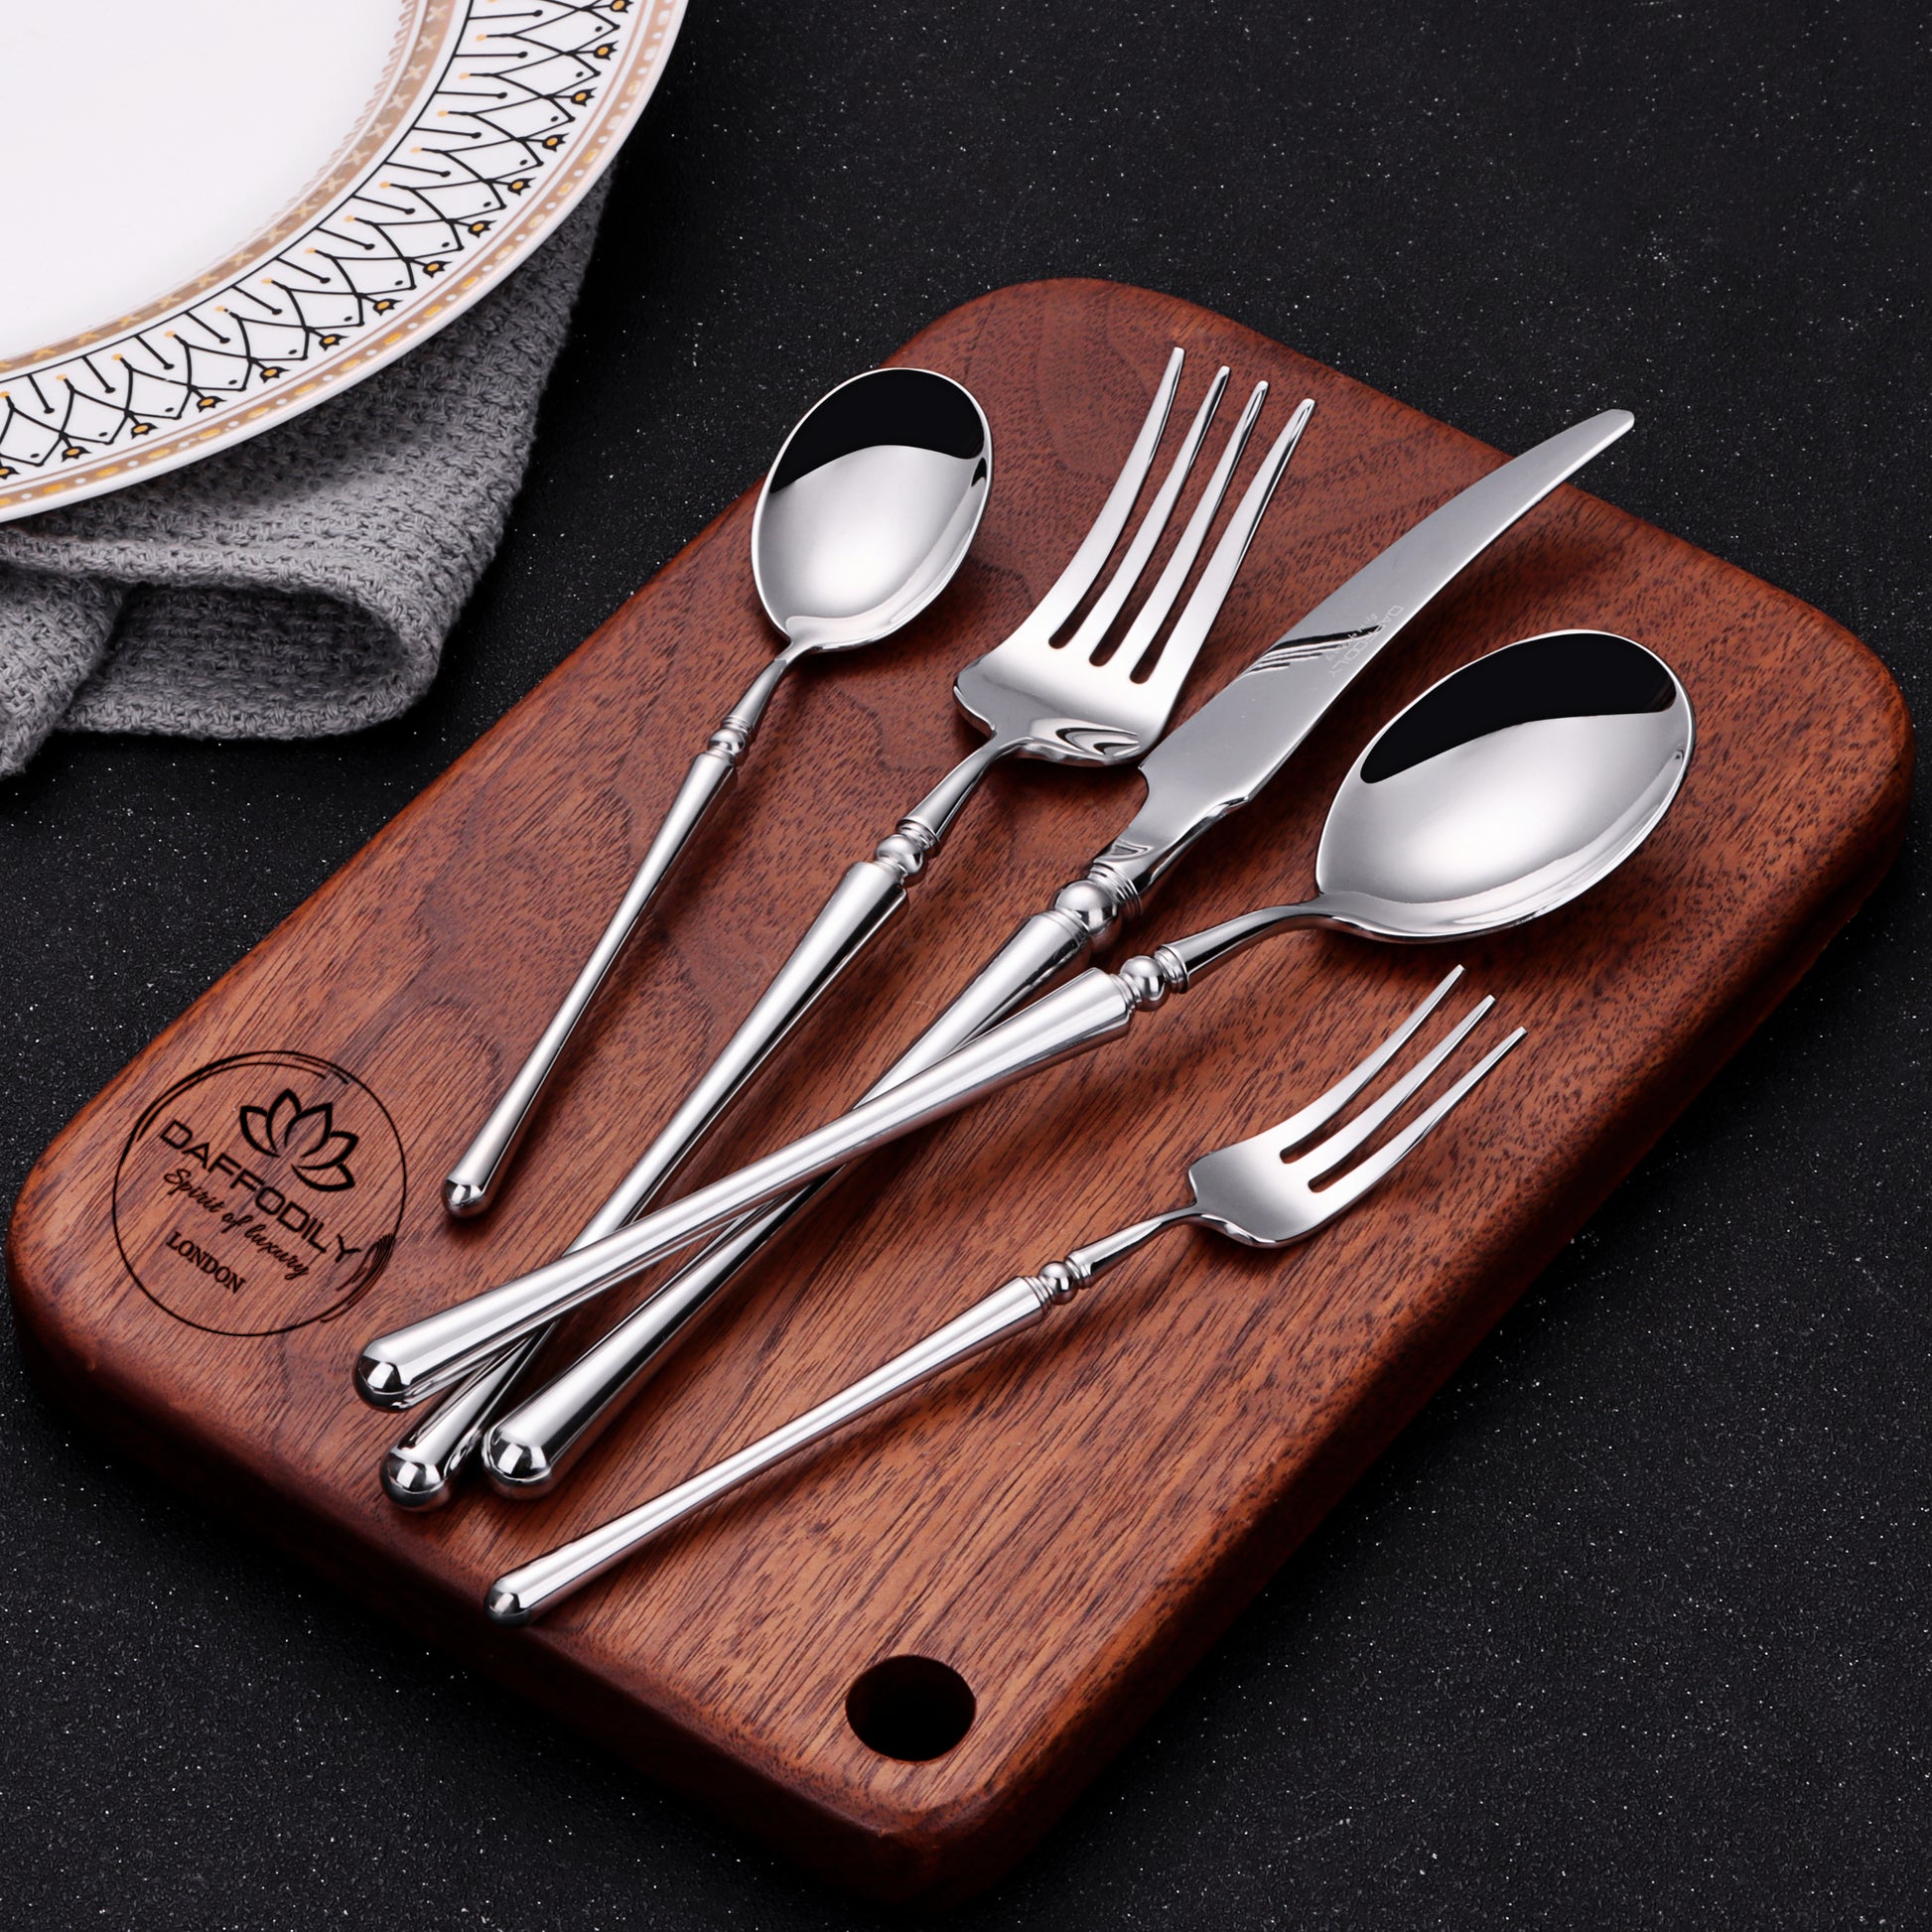 TALIN Luxury Collection: Elegant and versatile silverware set for your dining table